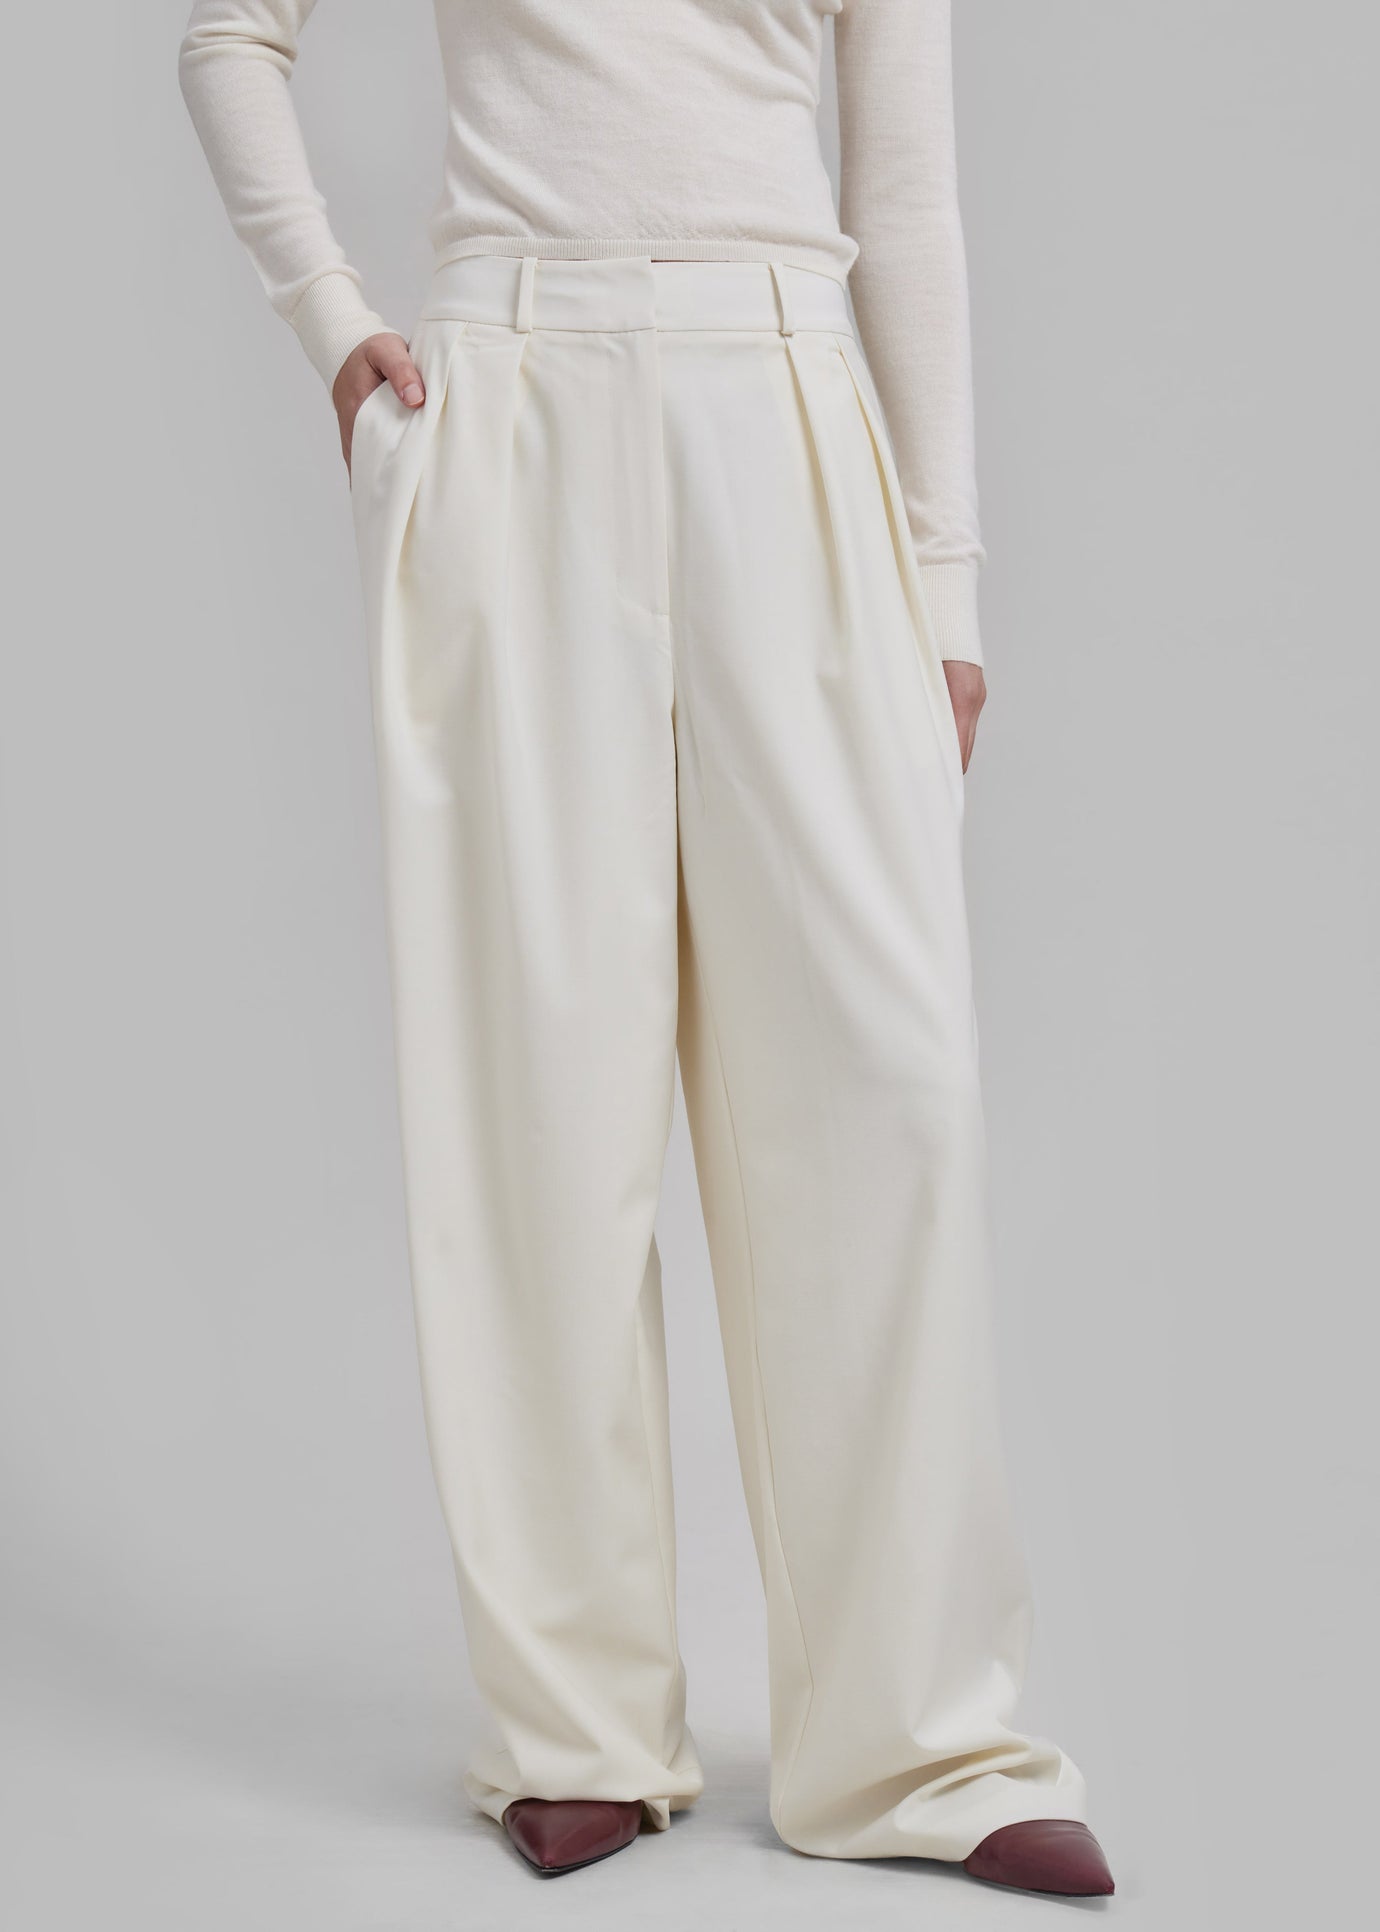 Ripley Pleated Trousers - Ivory - 1